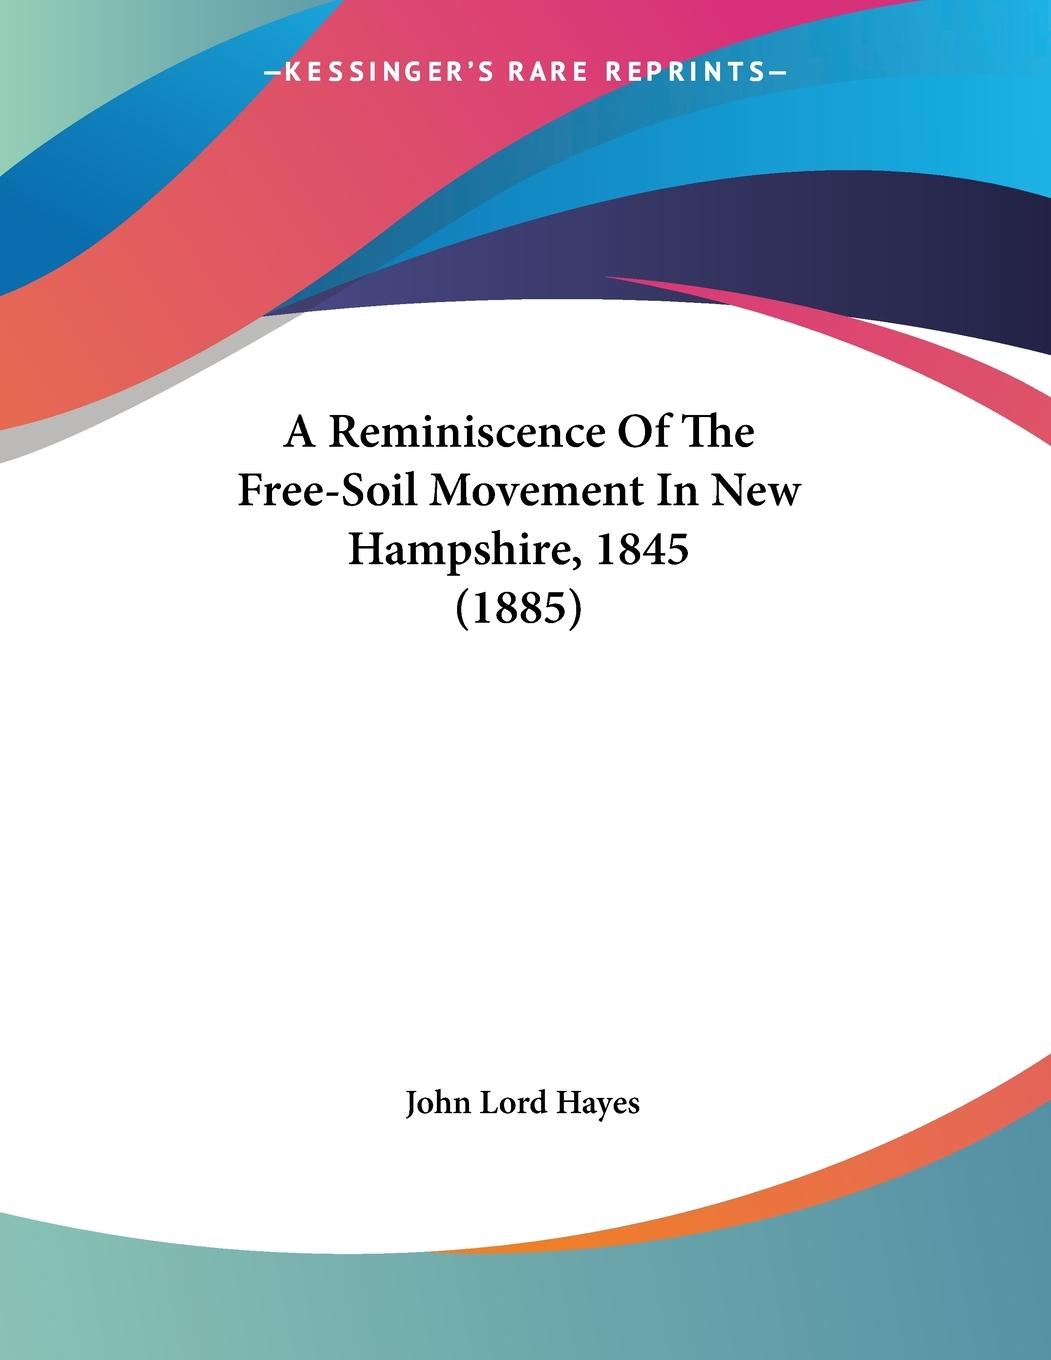 A Reminiscence Of The Free-Soil Movement In New Hampshire, 1845 (1885) - Hayes, John Lord